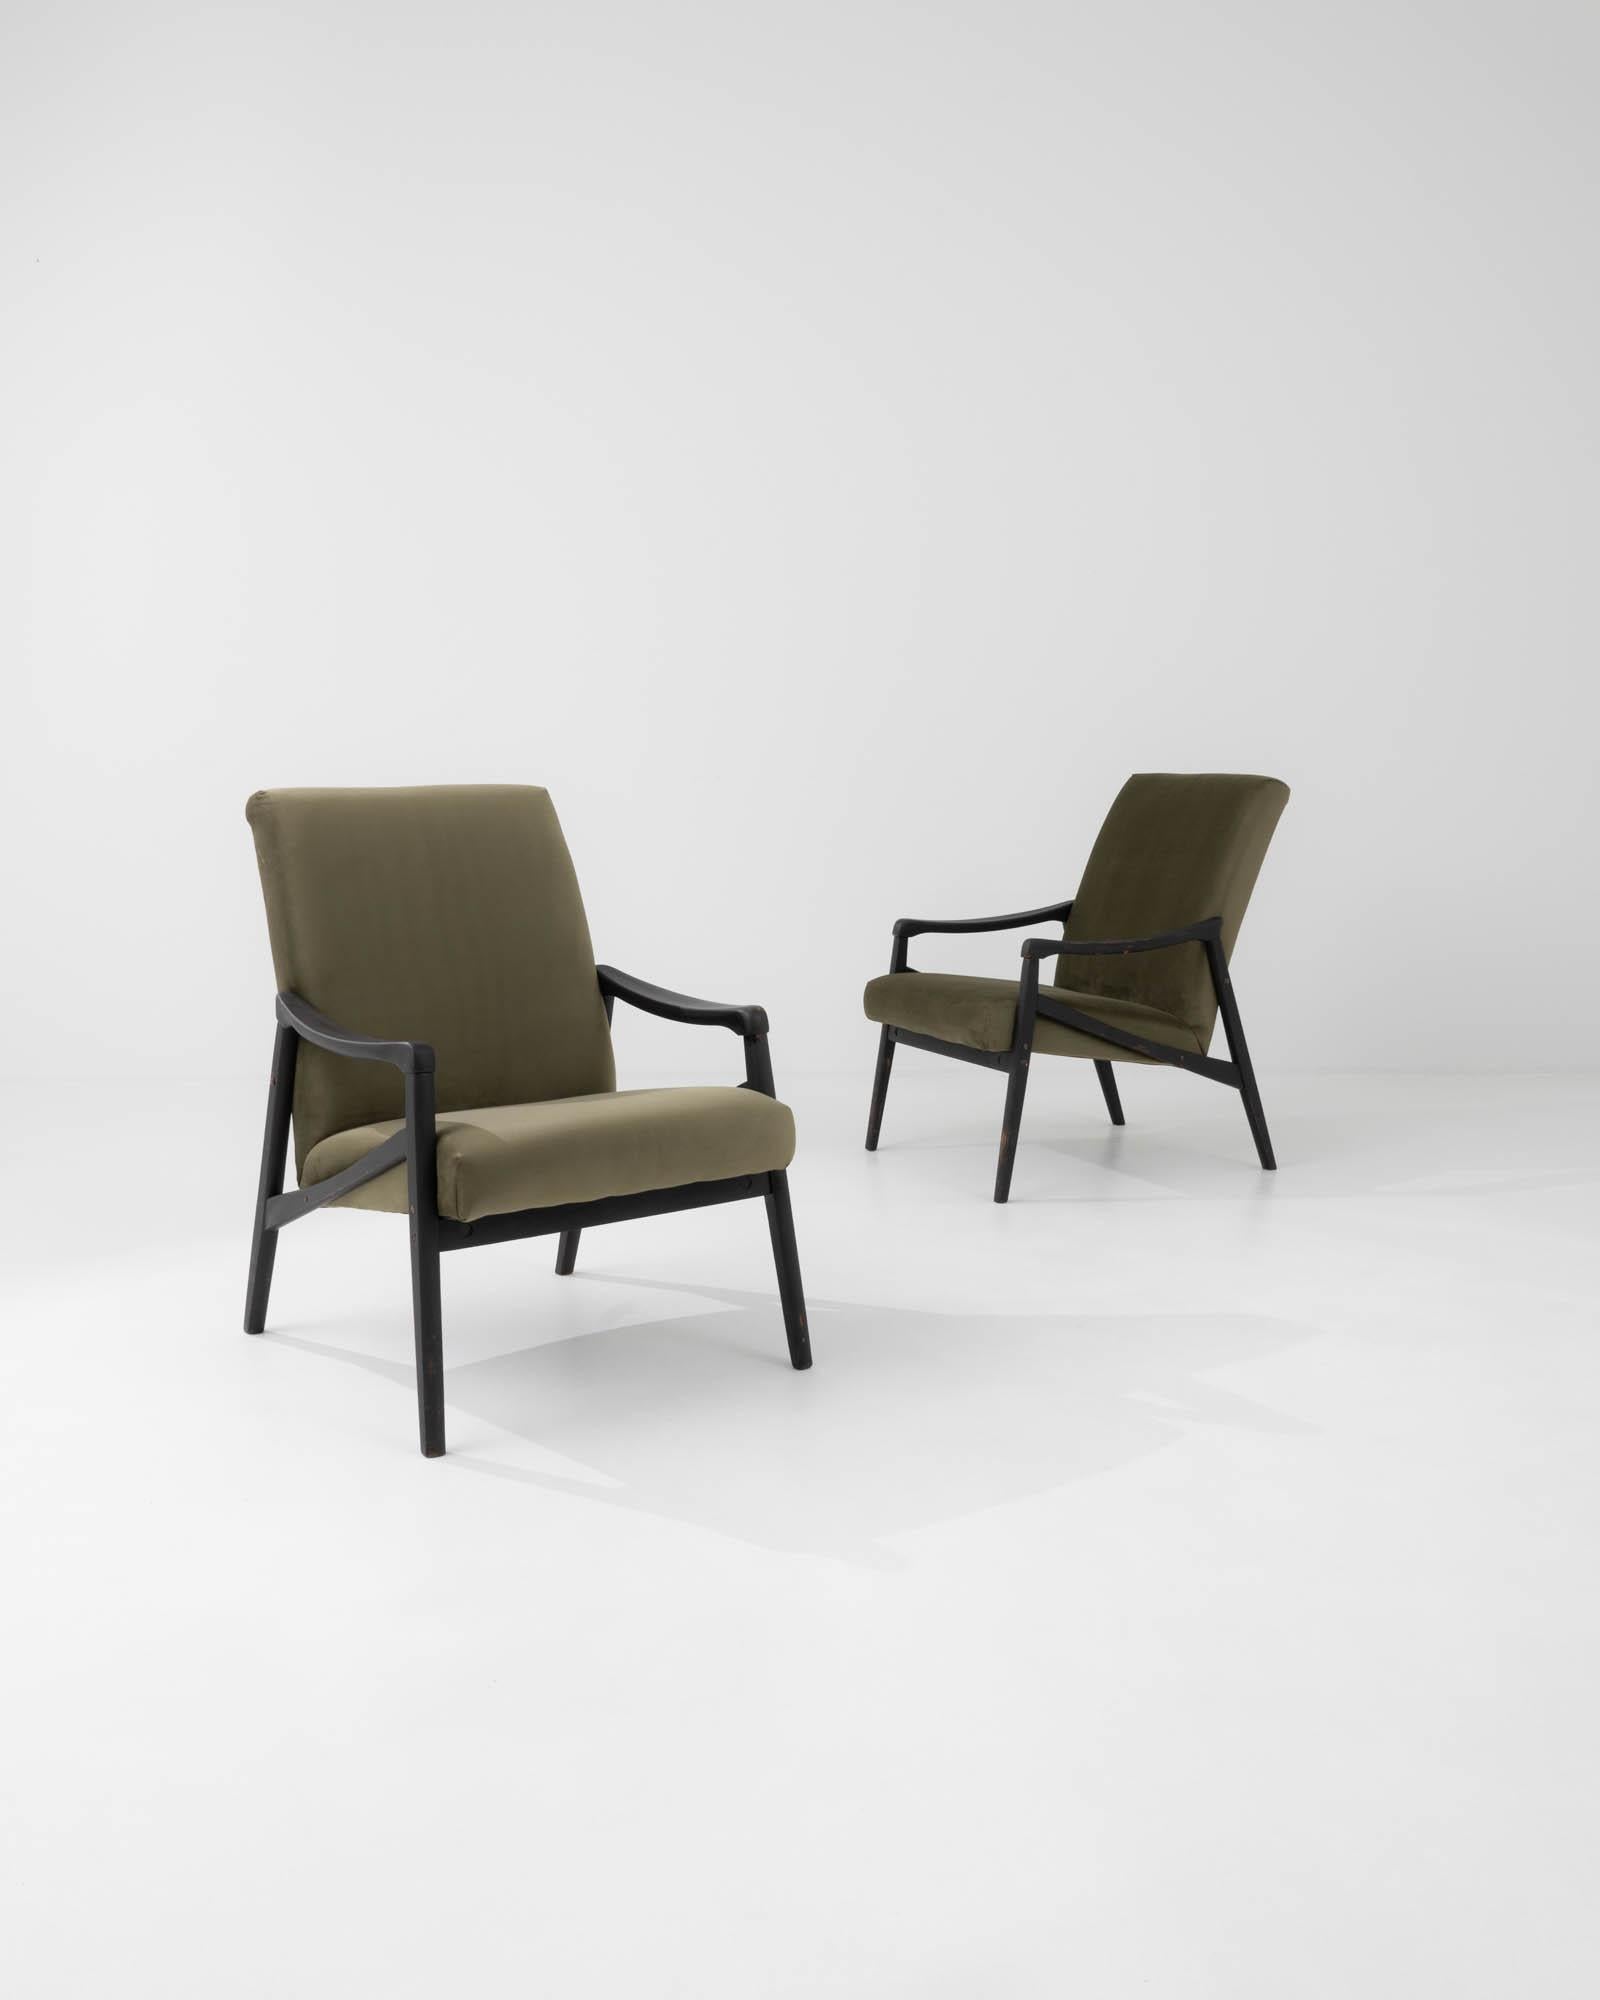 A pair of armchairs produced in the former Czechoslovakia, with the design attributed to Jiri Jiroutek. The 1960s design is reupholstered in a smooth olive-green velvet upholstery, pairing with delicately patinated hardwood for an effortless flow.